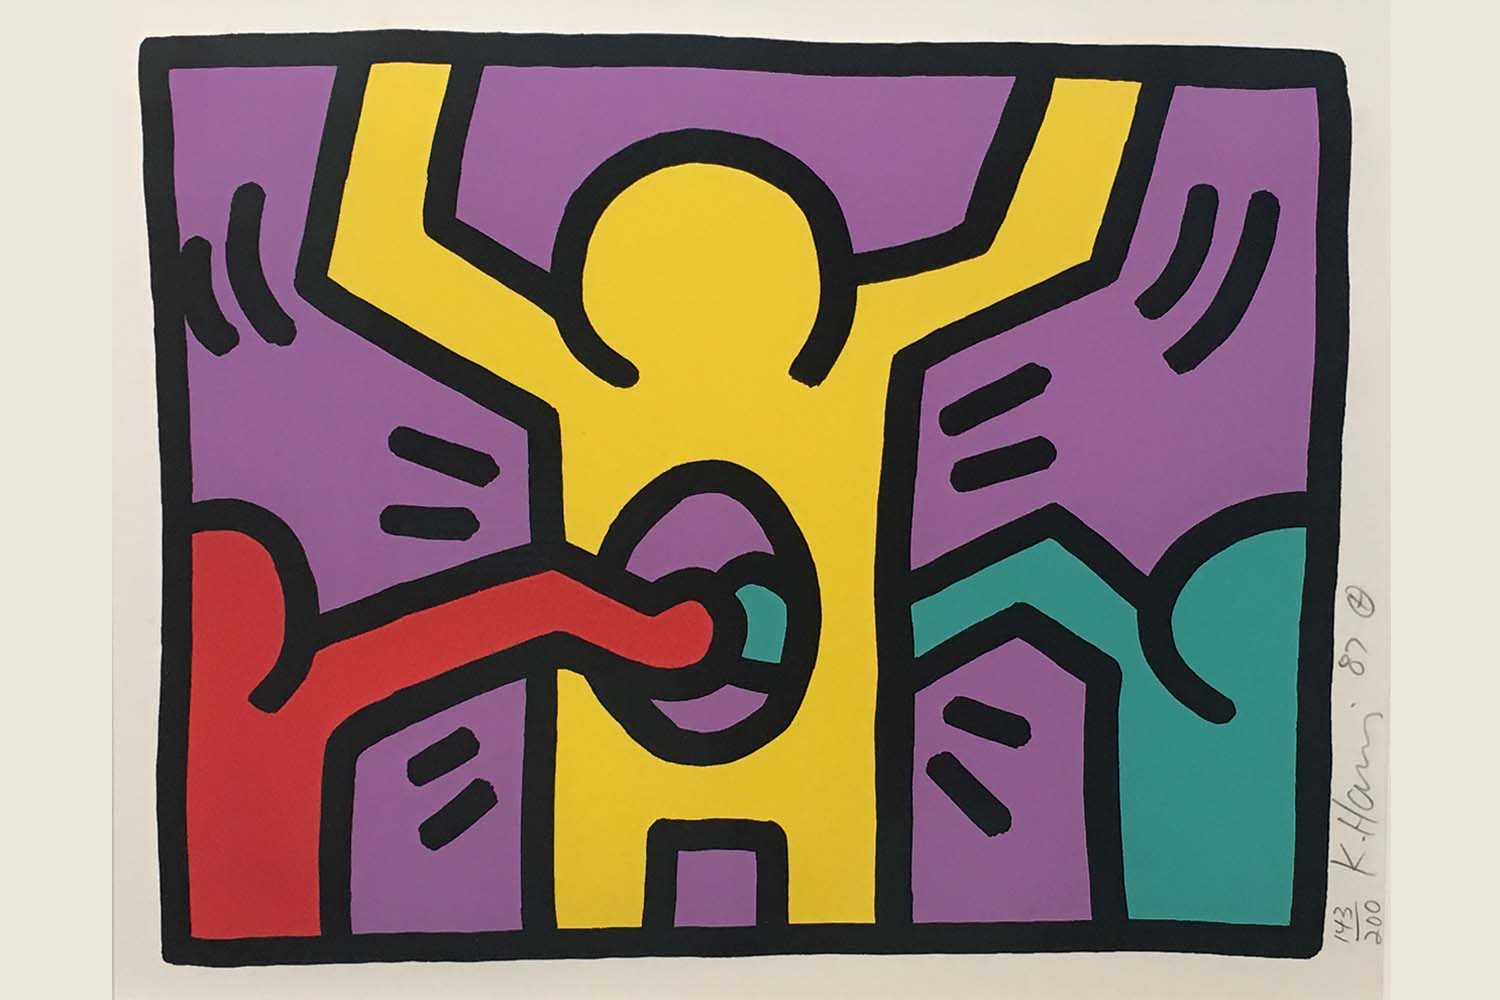 Keith Haring S Iconic Work Is The Subject Of London Selling Exhibition